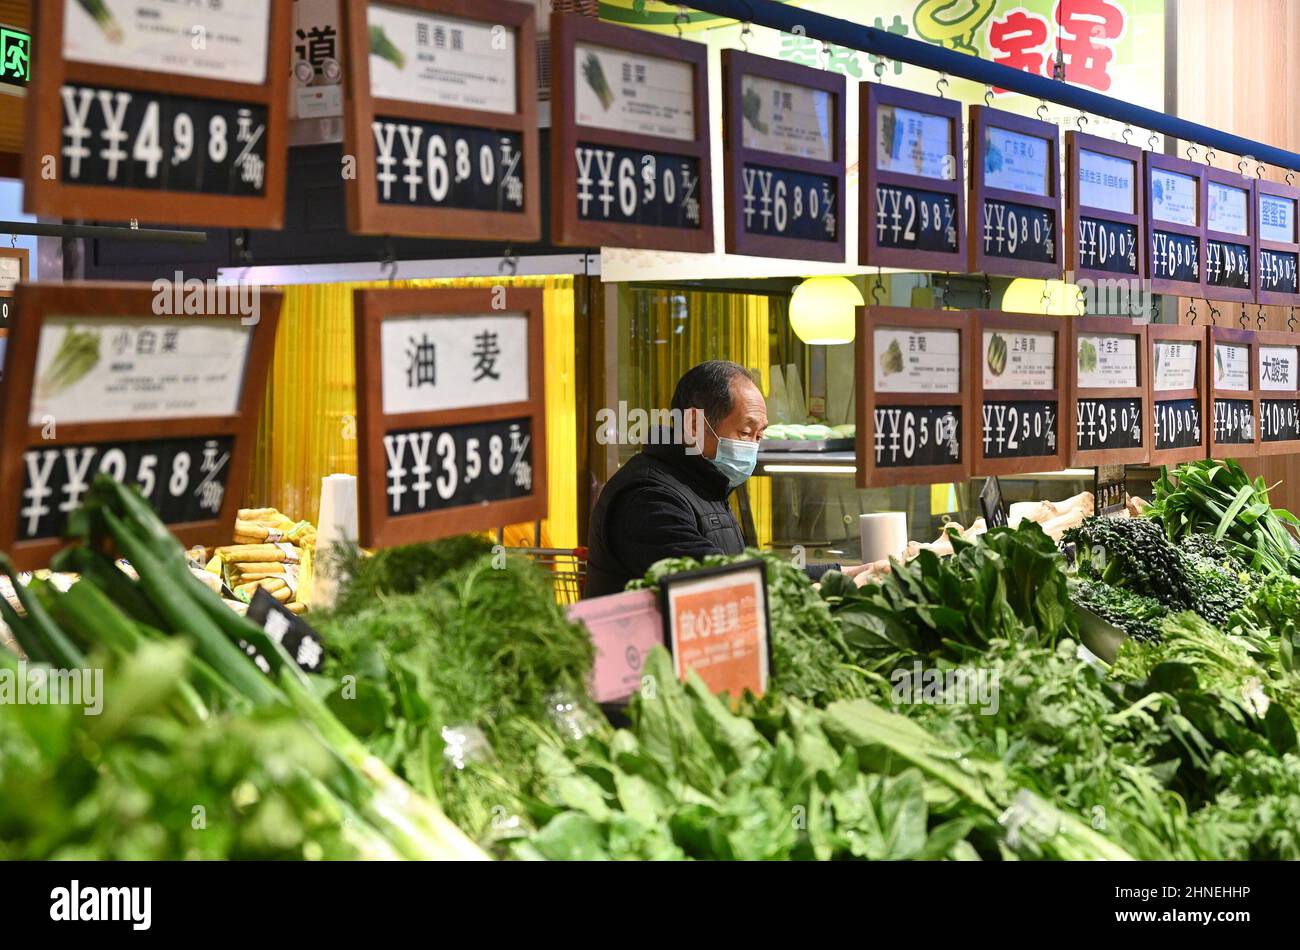 Handan, China's Hebei Province. 16th Feb, 2022. A customer shops vegetables at a supermarket in Handan, north China's Hebei Province, Feb. 16, 2022. China's inflation was further tamed in January as food prices saw a decline, while price retreats in coal and steel sectors prompted factory-gate inflation to moderate, official data showed Wednesday. The consumer price index (CPI), a main gauge of inflation, rose 0.9 percent year on year in January, down from the 1.5-percent increase a month ago, data from the National Bureau of Statistics (NBS) showed. Credit: Hao Qunying/Xinhua/Alamy Live News Stock Photo